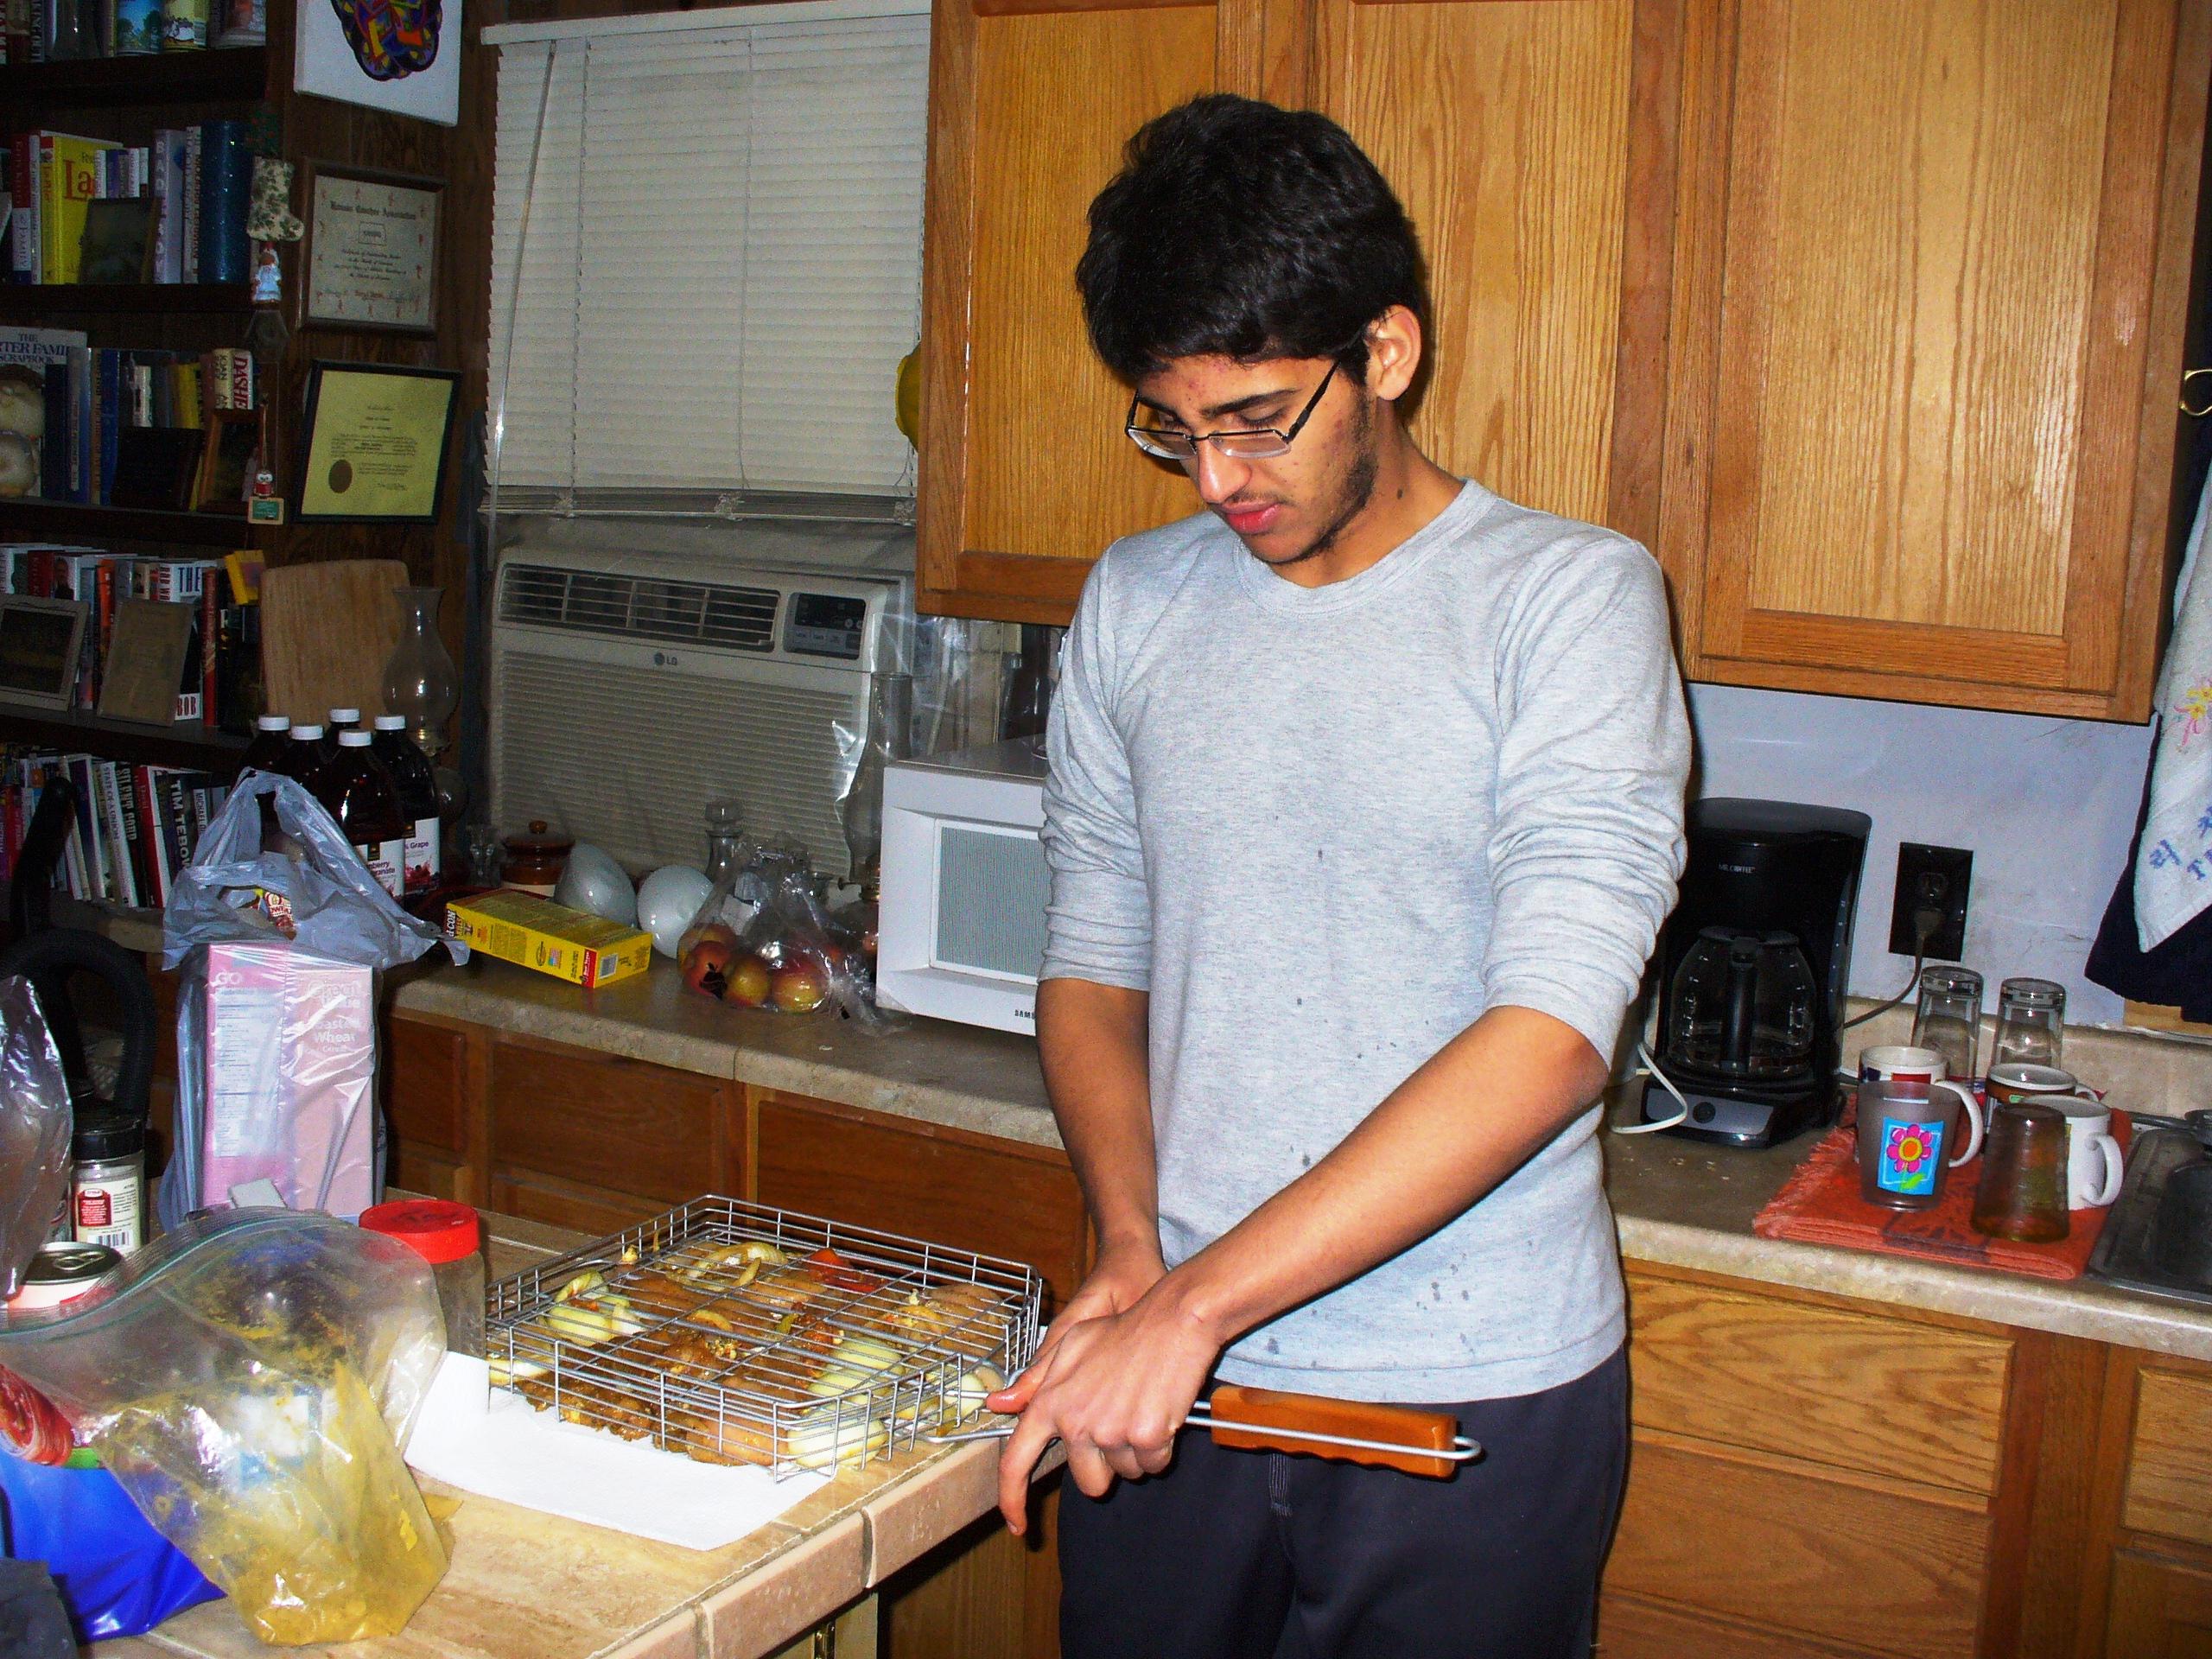 Fayez cooking in the kitchen.